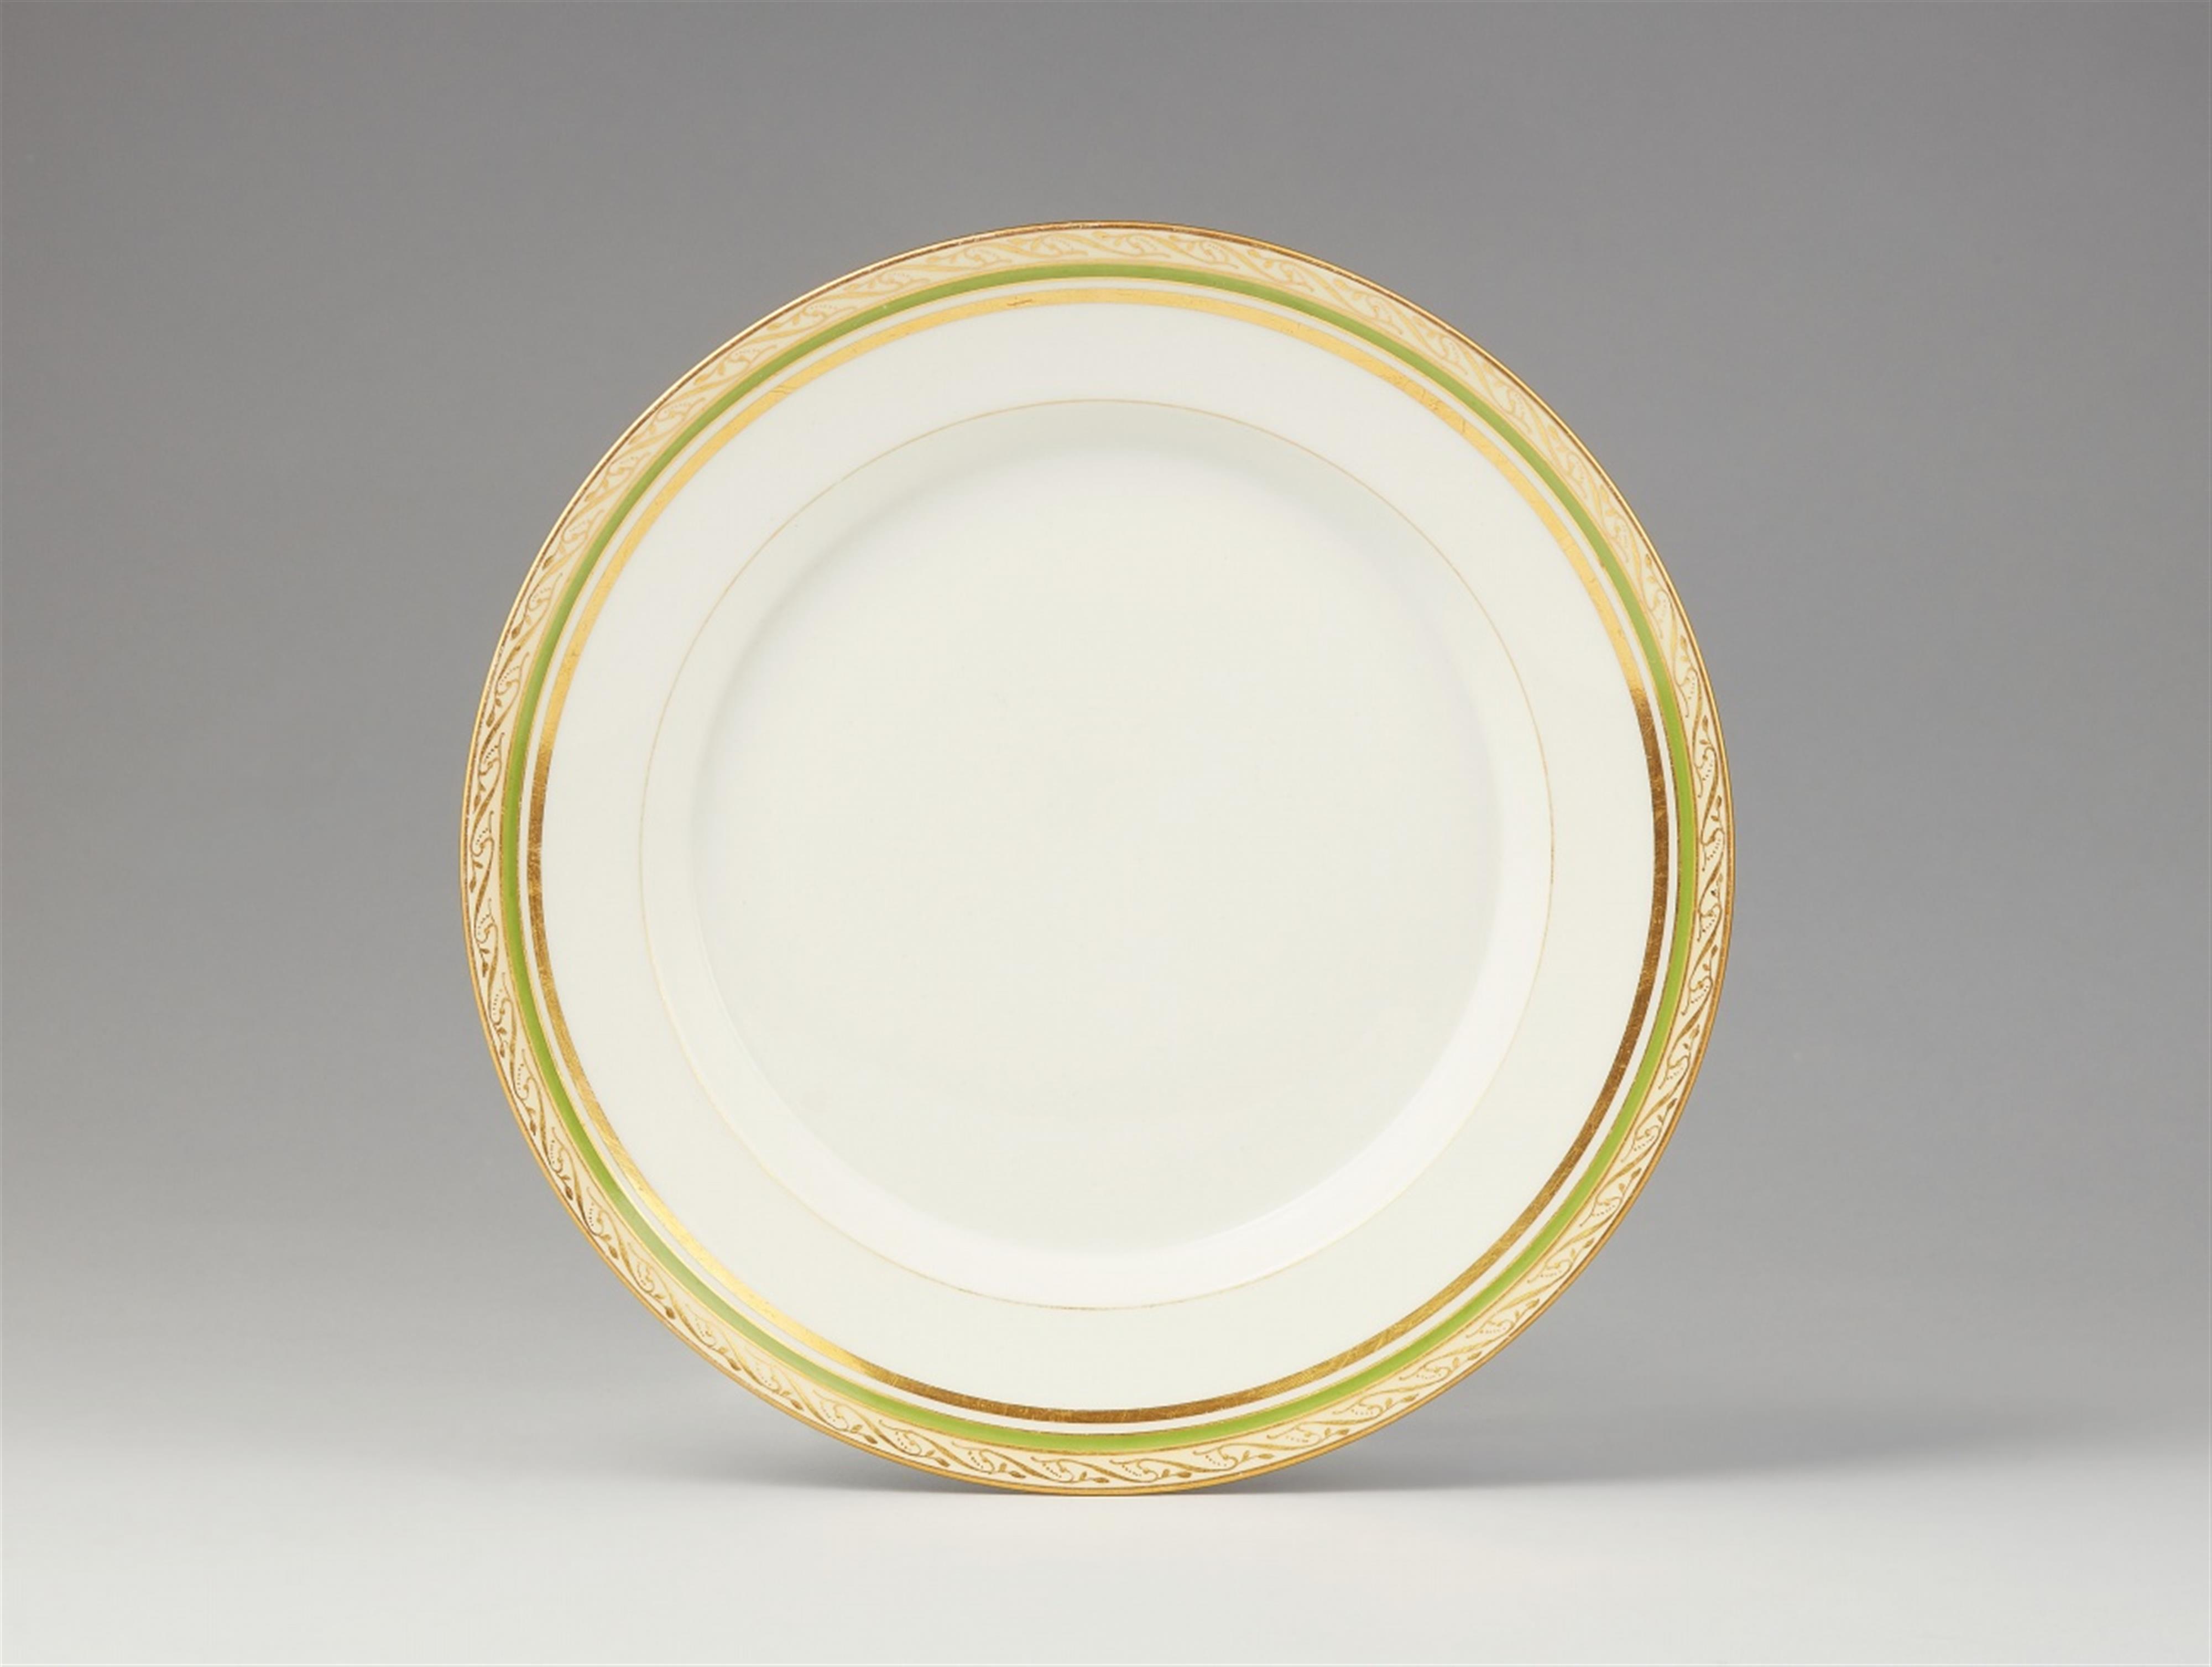 A Berlin KPM porcelain plate made for the Imperial household - image-1